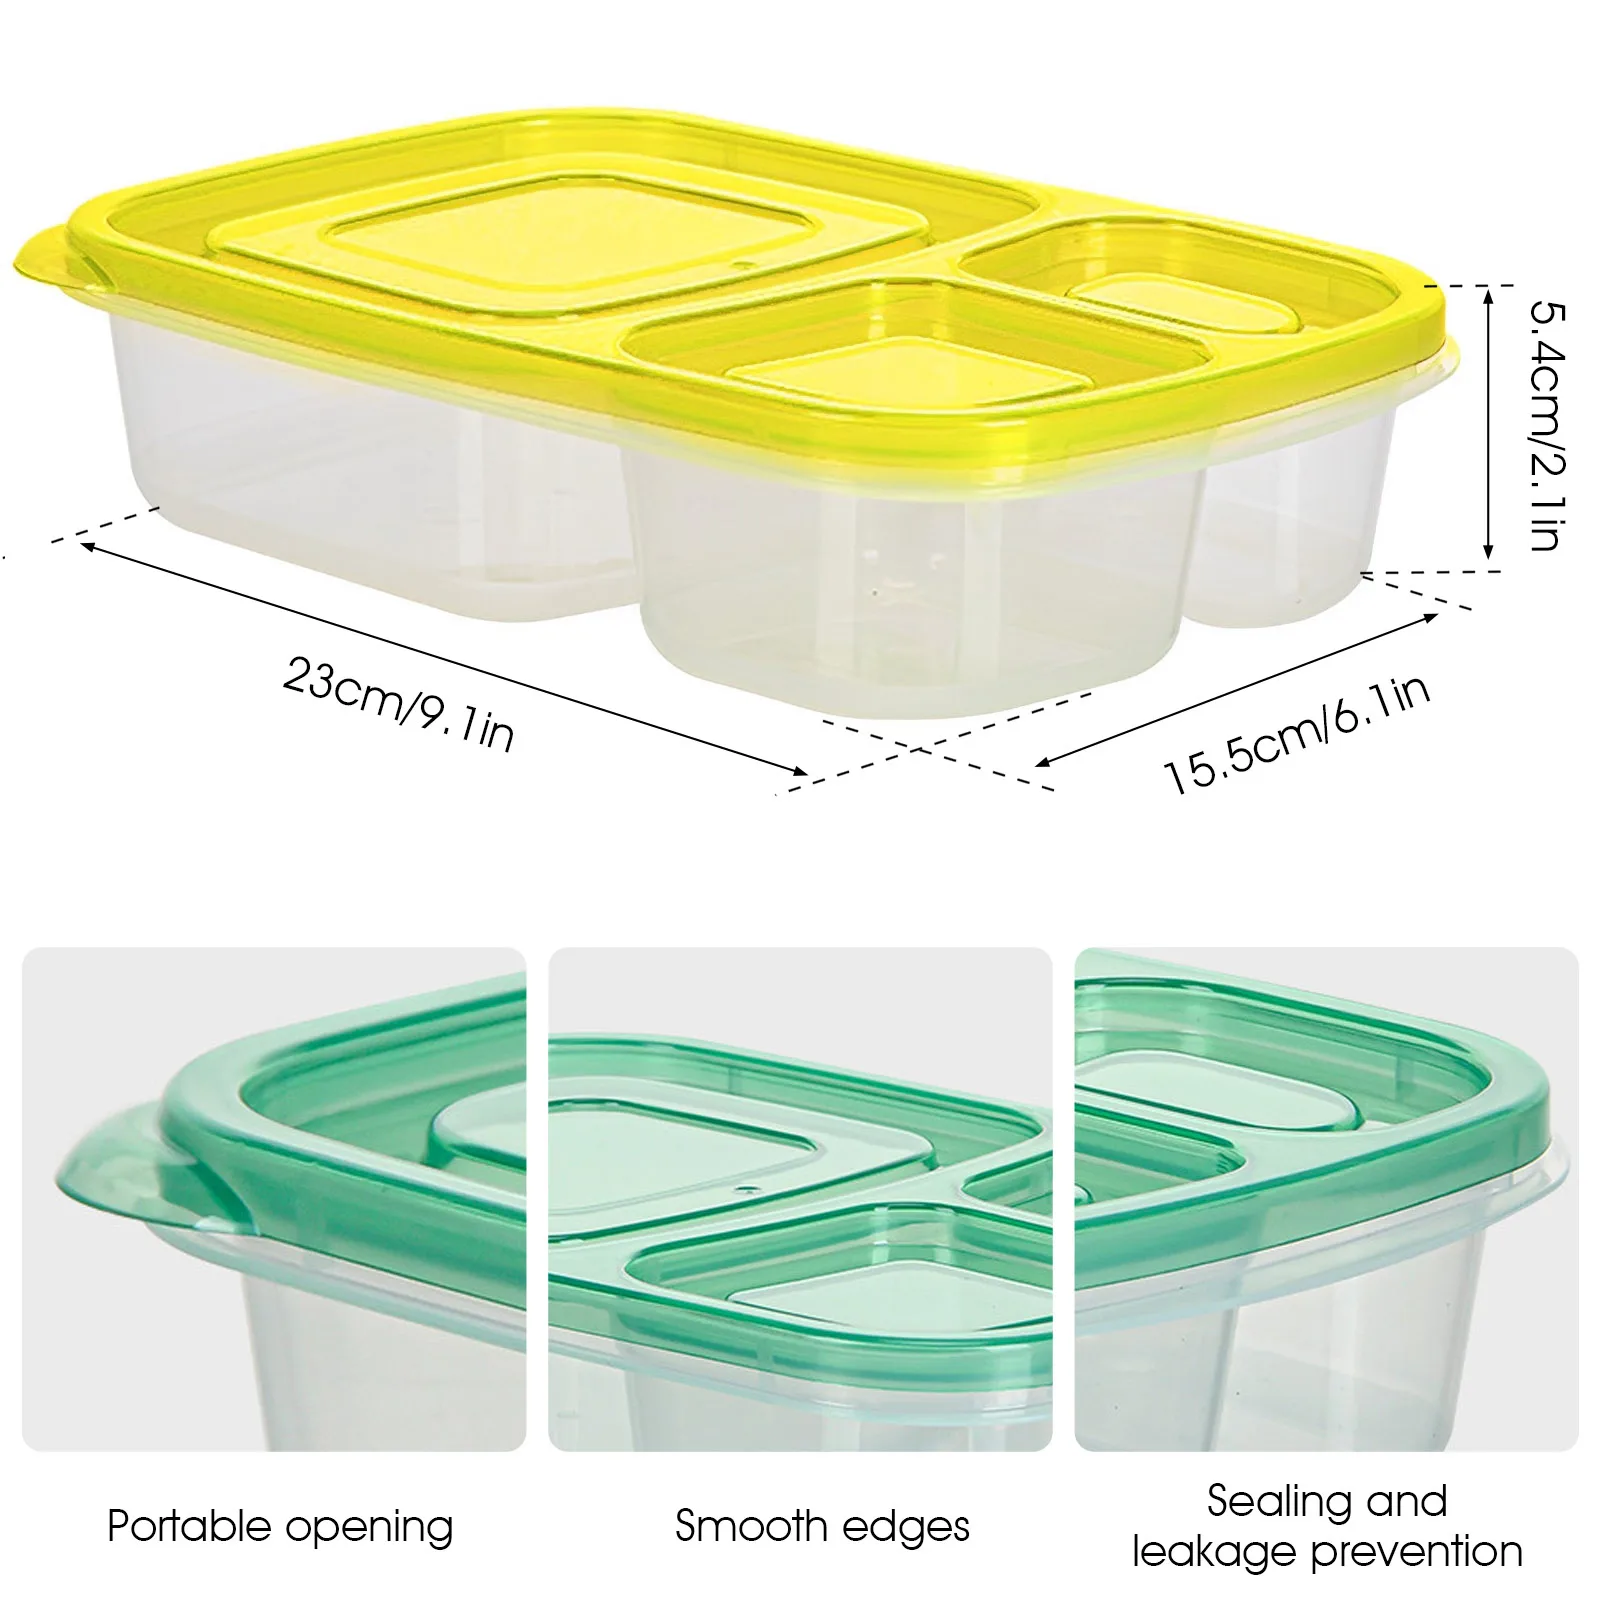 https://ae01.alicdn.com/kf/S61cacda65bf5491680d518e3be92e87ak/7Pcs-lunch-bento-lunch-boxes-with-3-compartments-temperature-resistant-food-storage-with-lid-leak-proof.jpg